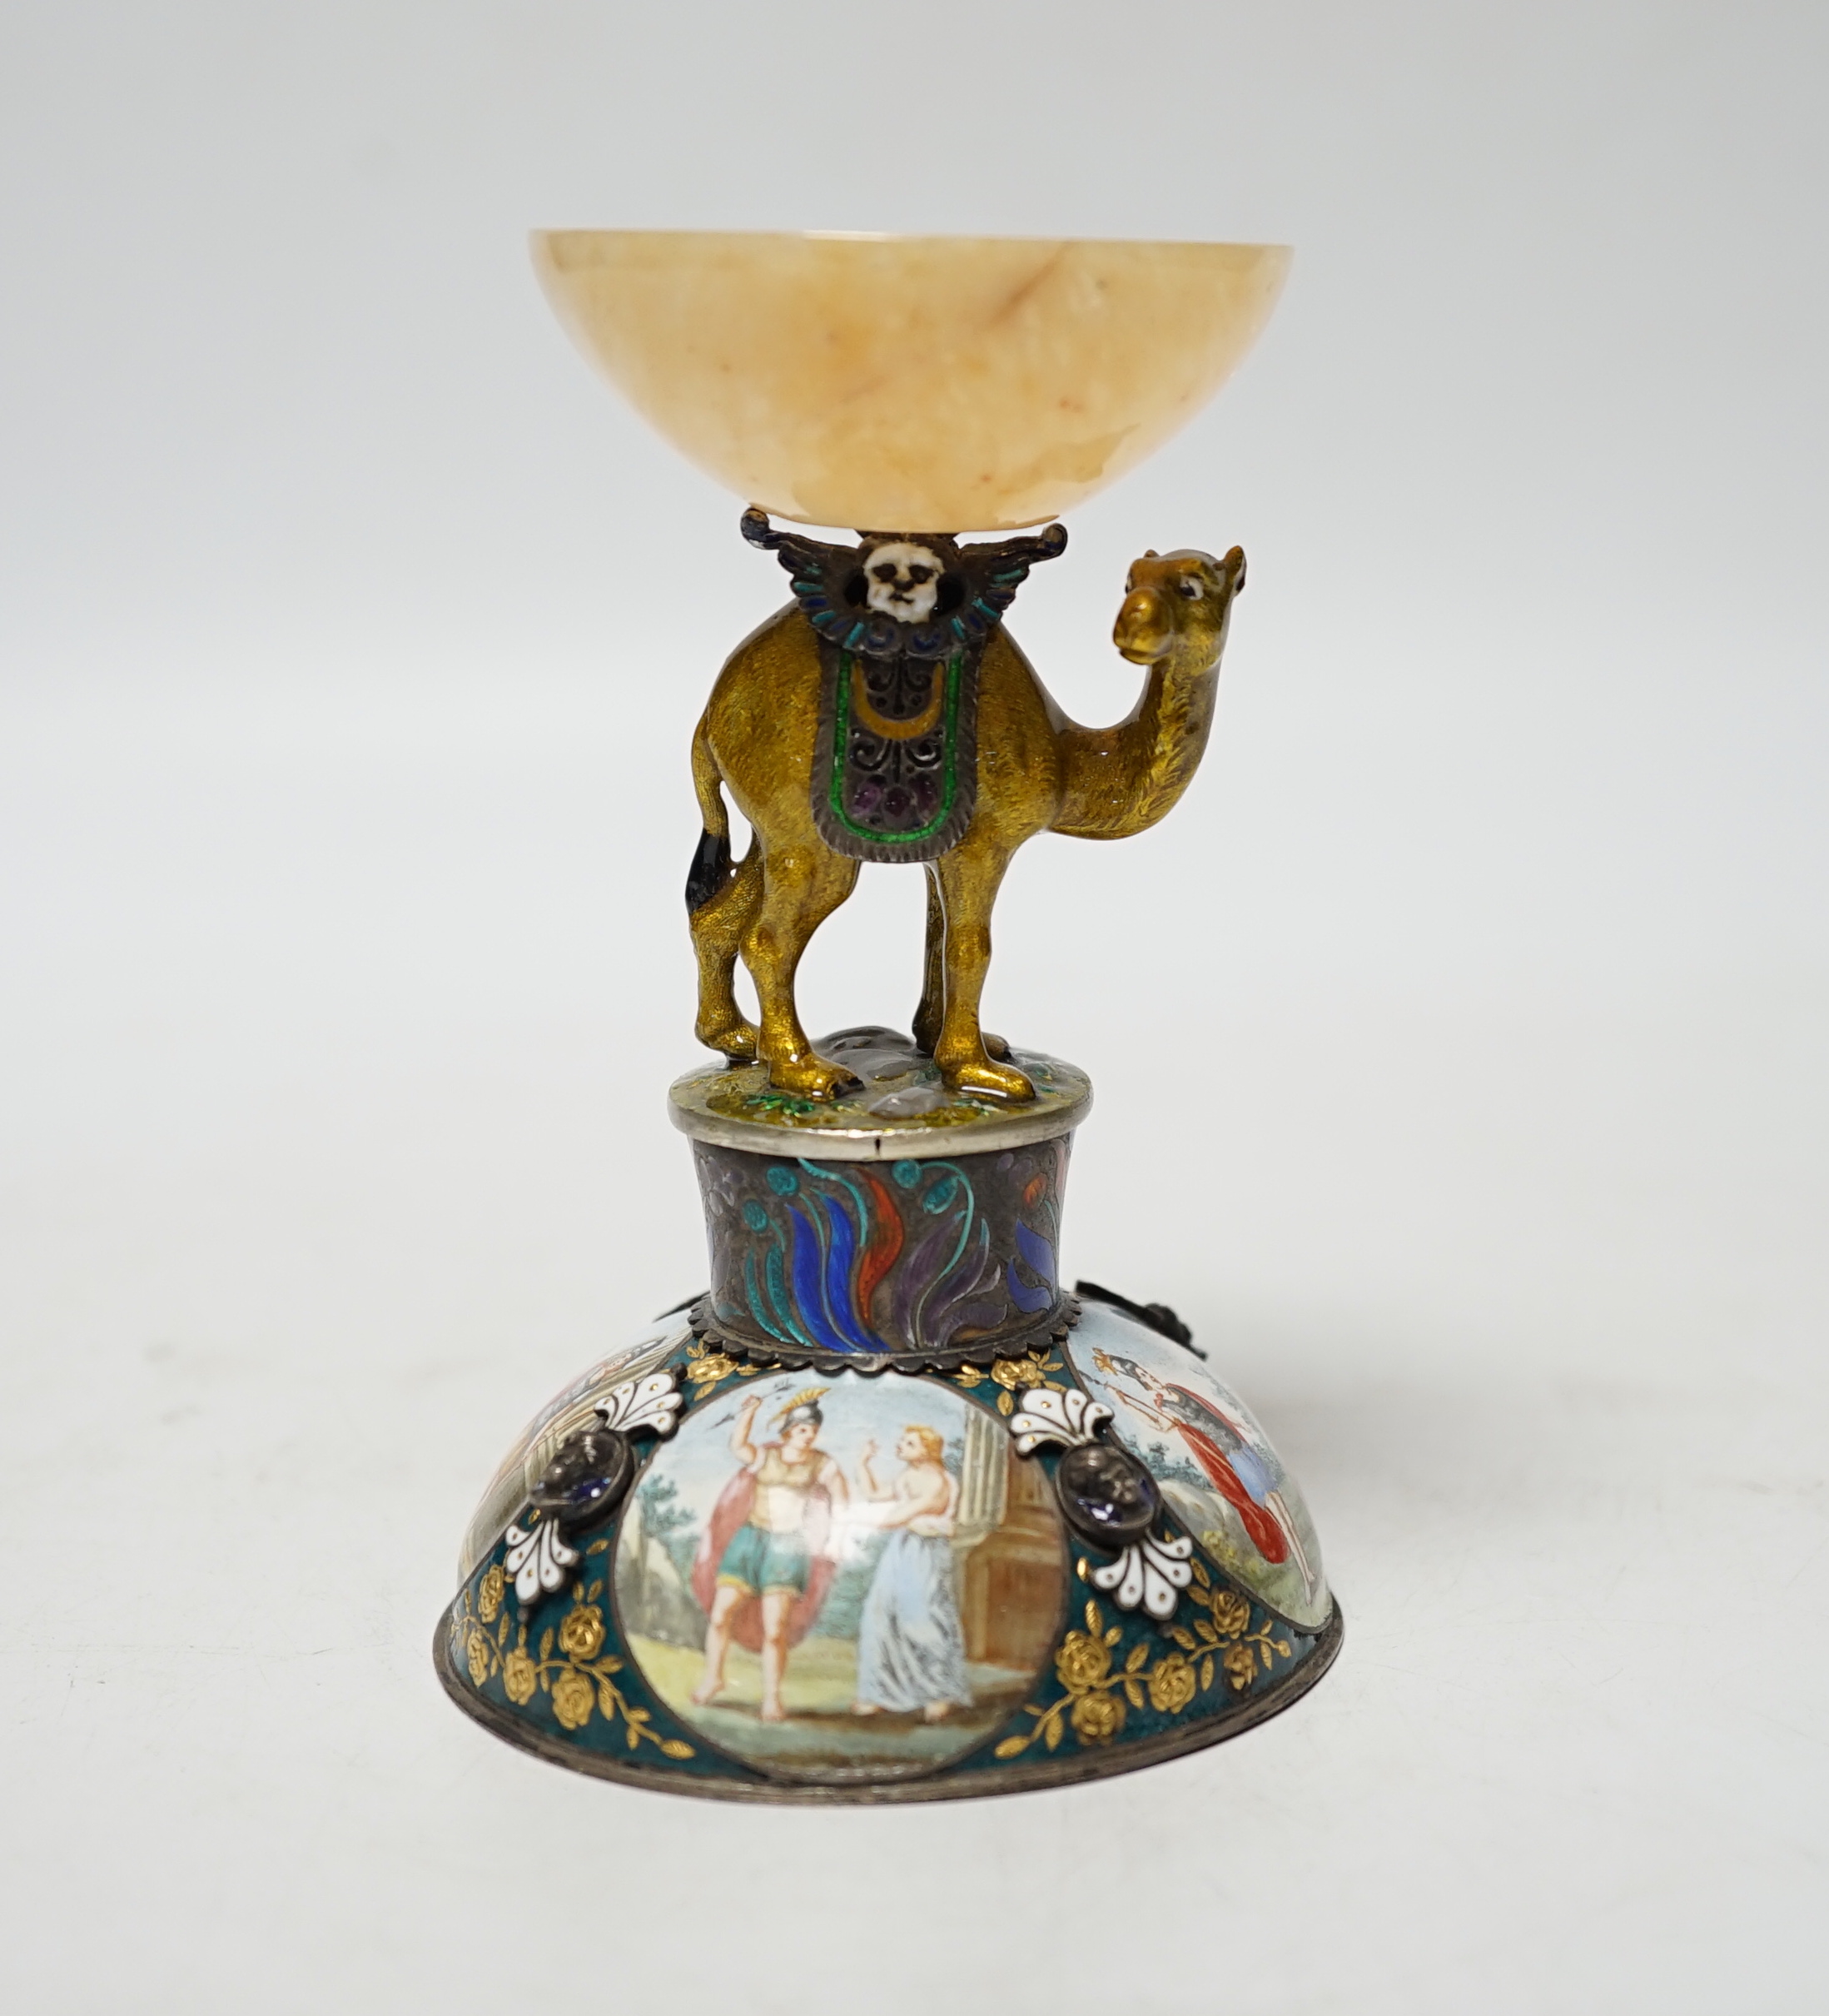 A 19th century Viennese? white metal, polychrome enamel and onyx mounted small centrepiece decorated with figural scenes, the stem in the form of a camel, height 10.7cm.